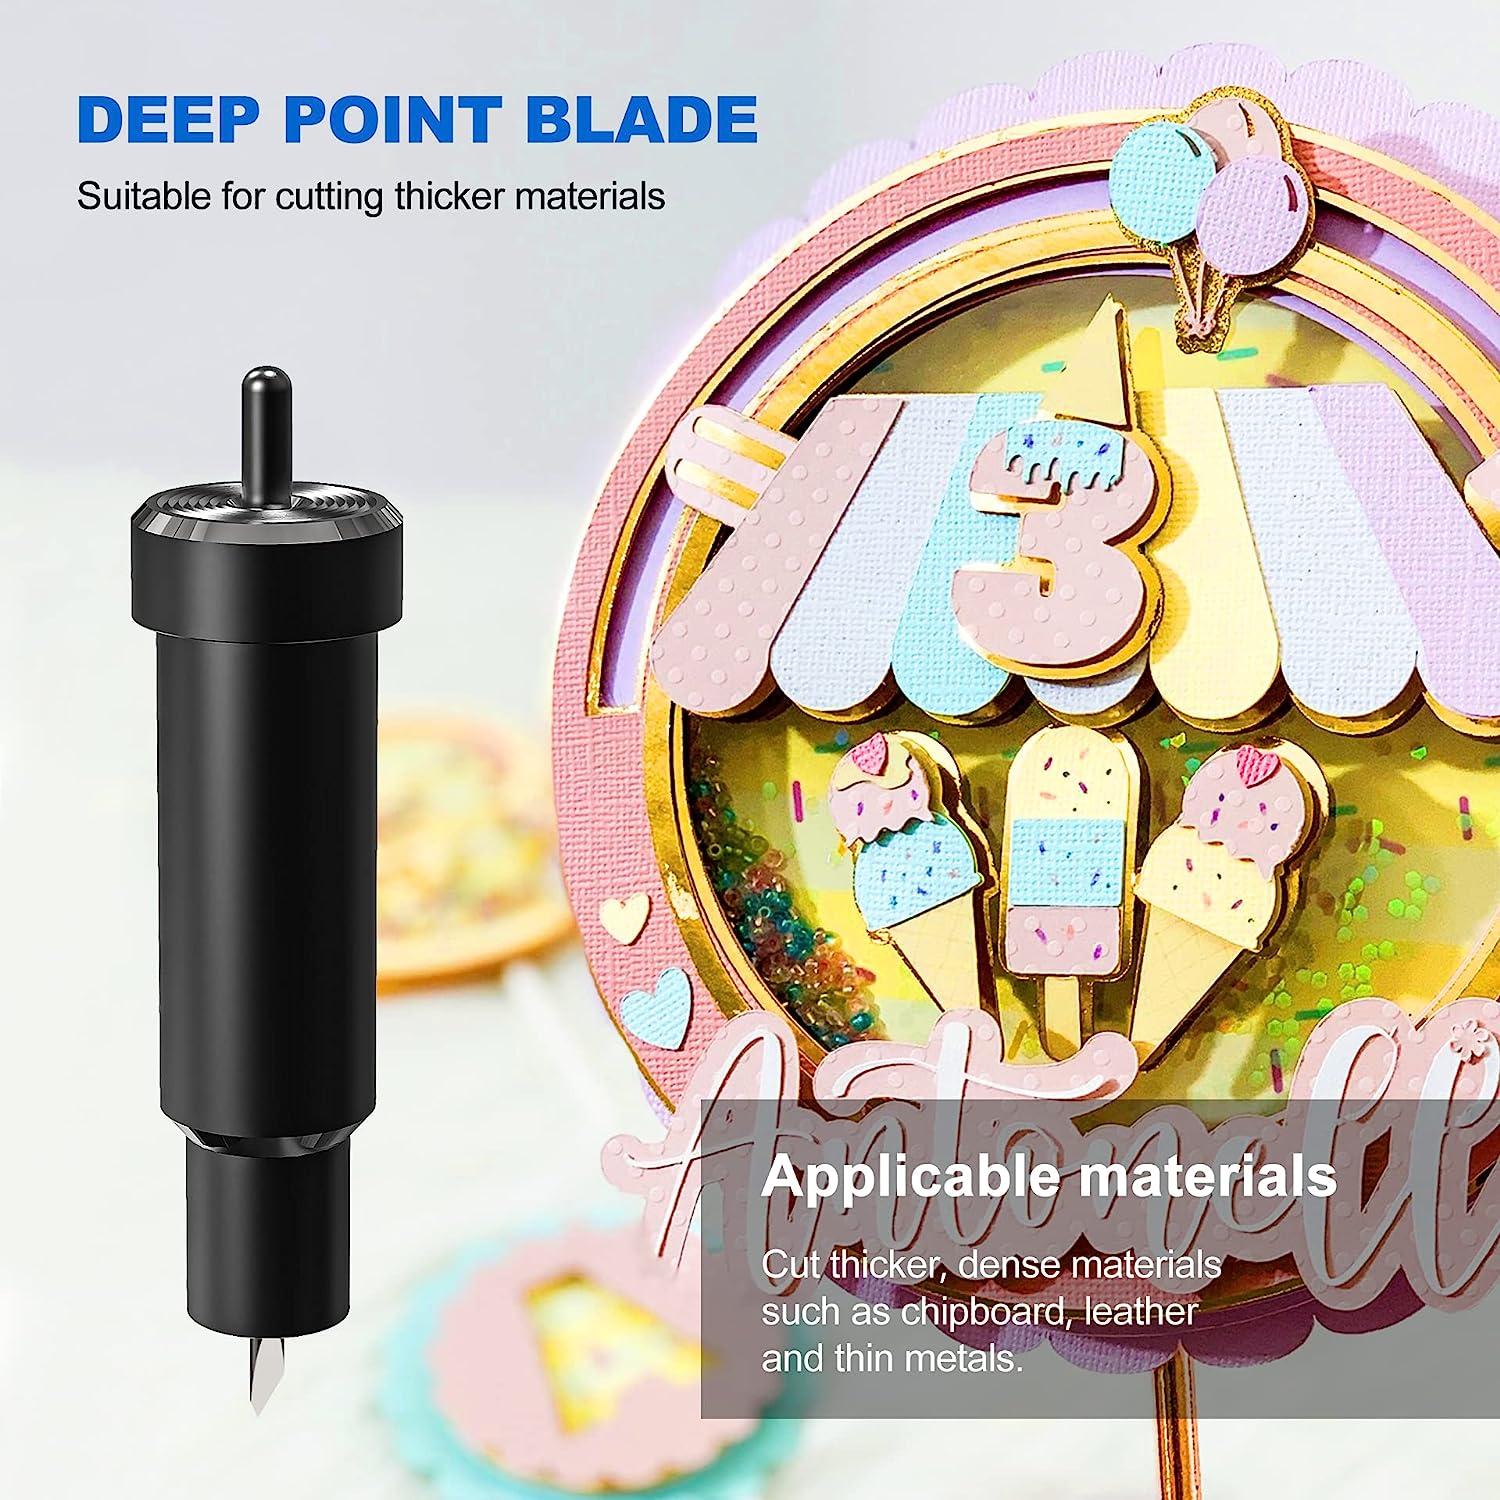  Explore Deep Cut Blade Compatible with Explore 3/Air  2/Air/One/Maker 3/Maker/Venture Aosry Deep Point Blade and Housing for  Cutting Thick Materials-Craft Foam/Chipboard/Leather/Magnetic/Vellum Etc